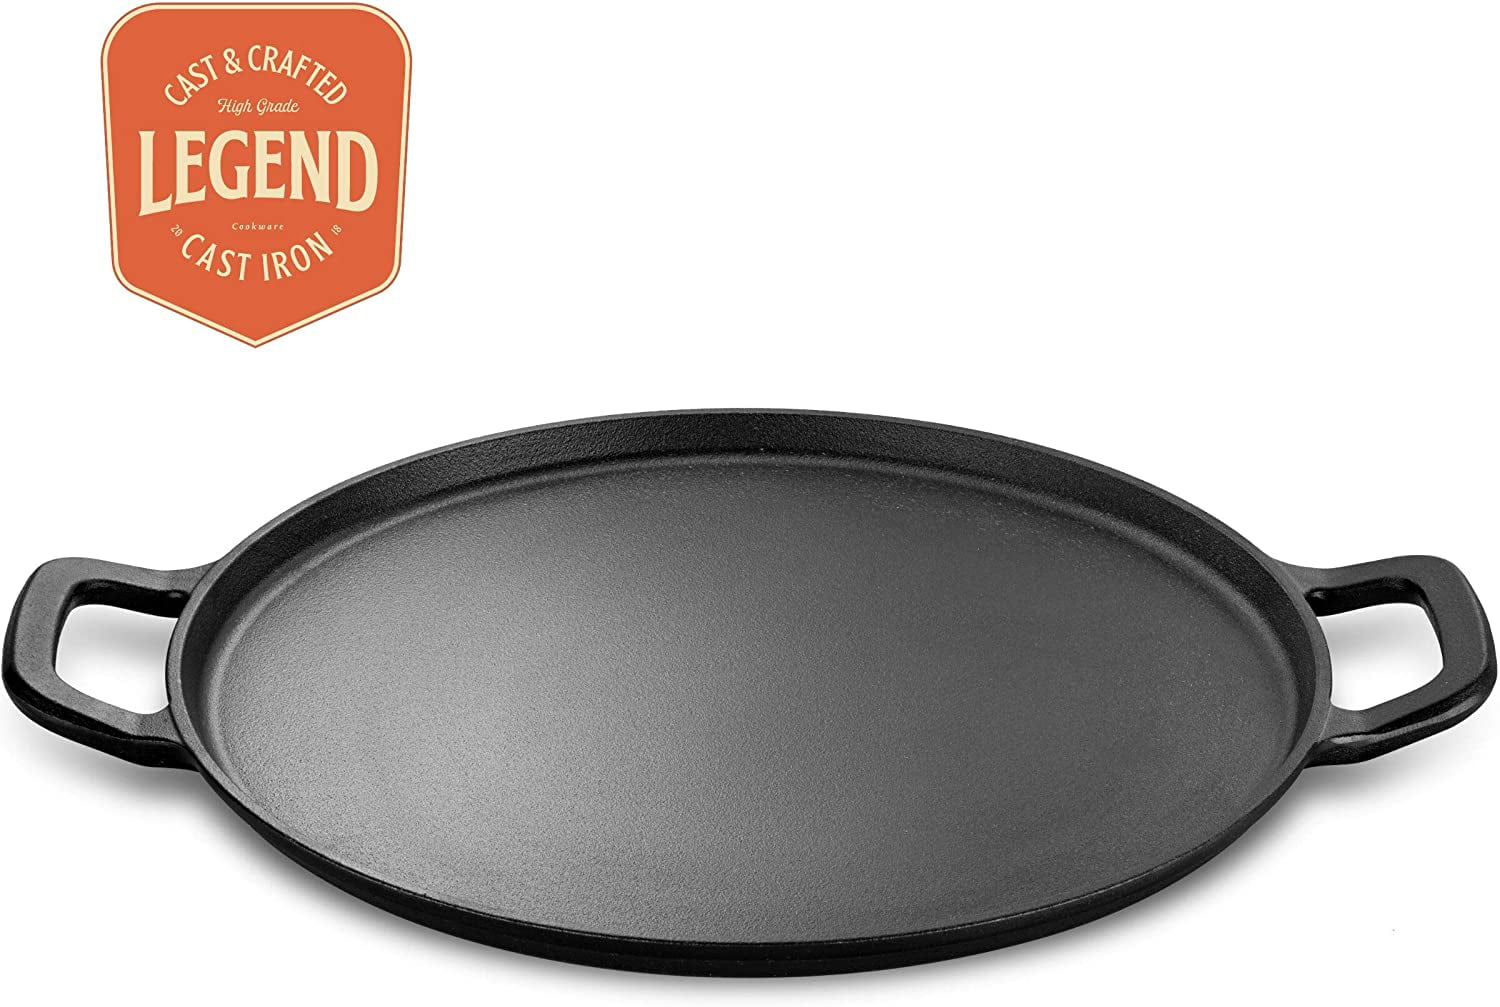 Grilling Induction 14” Steel Pizza Cooker with Easy Grip Handles Lightly Pre-Seasoned Cookware Gets Better with Use Deep Stone for Oven or Griddle for Gas Legend Cast Iron Pizza Pan Sauteing 